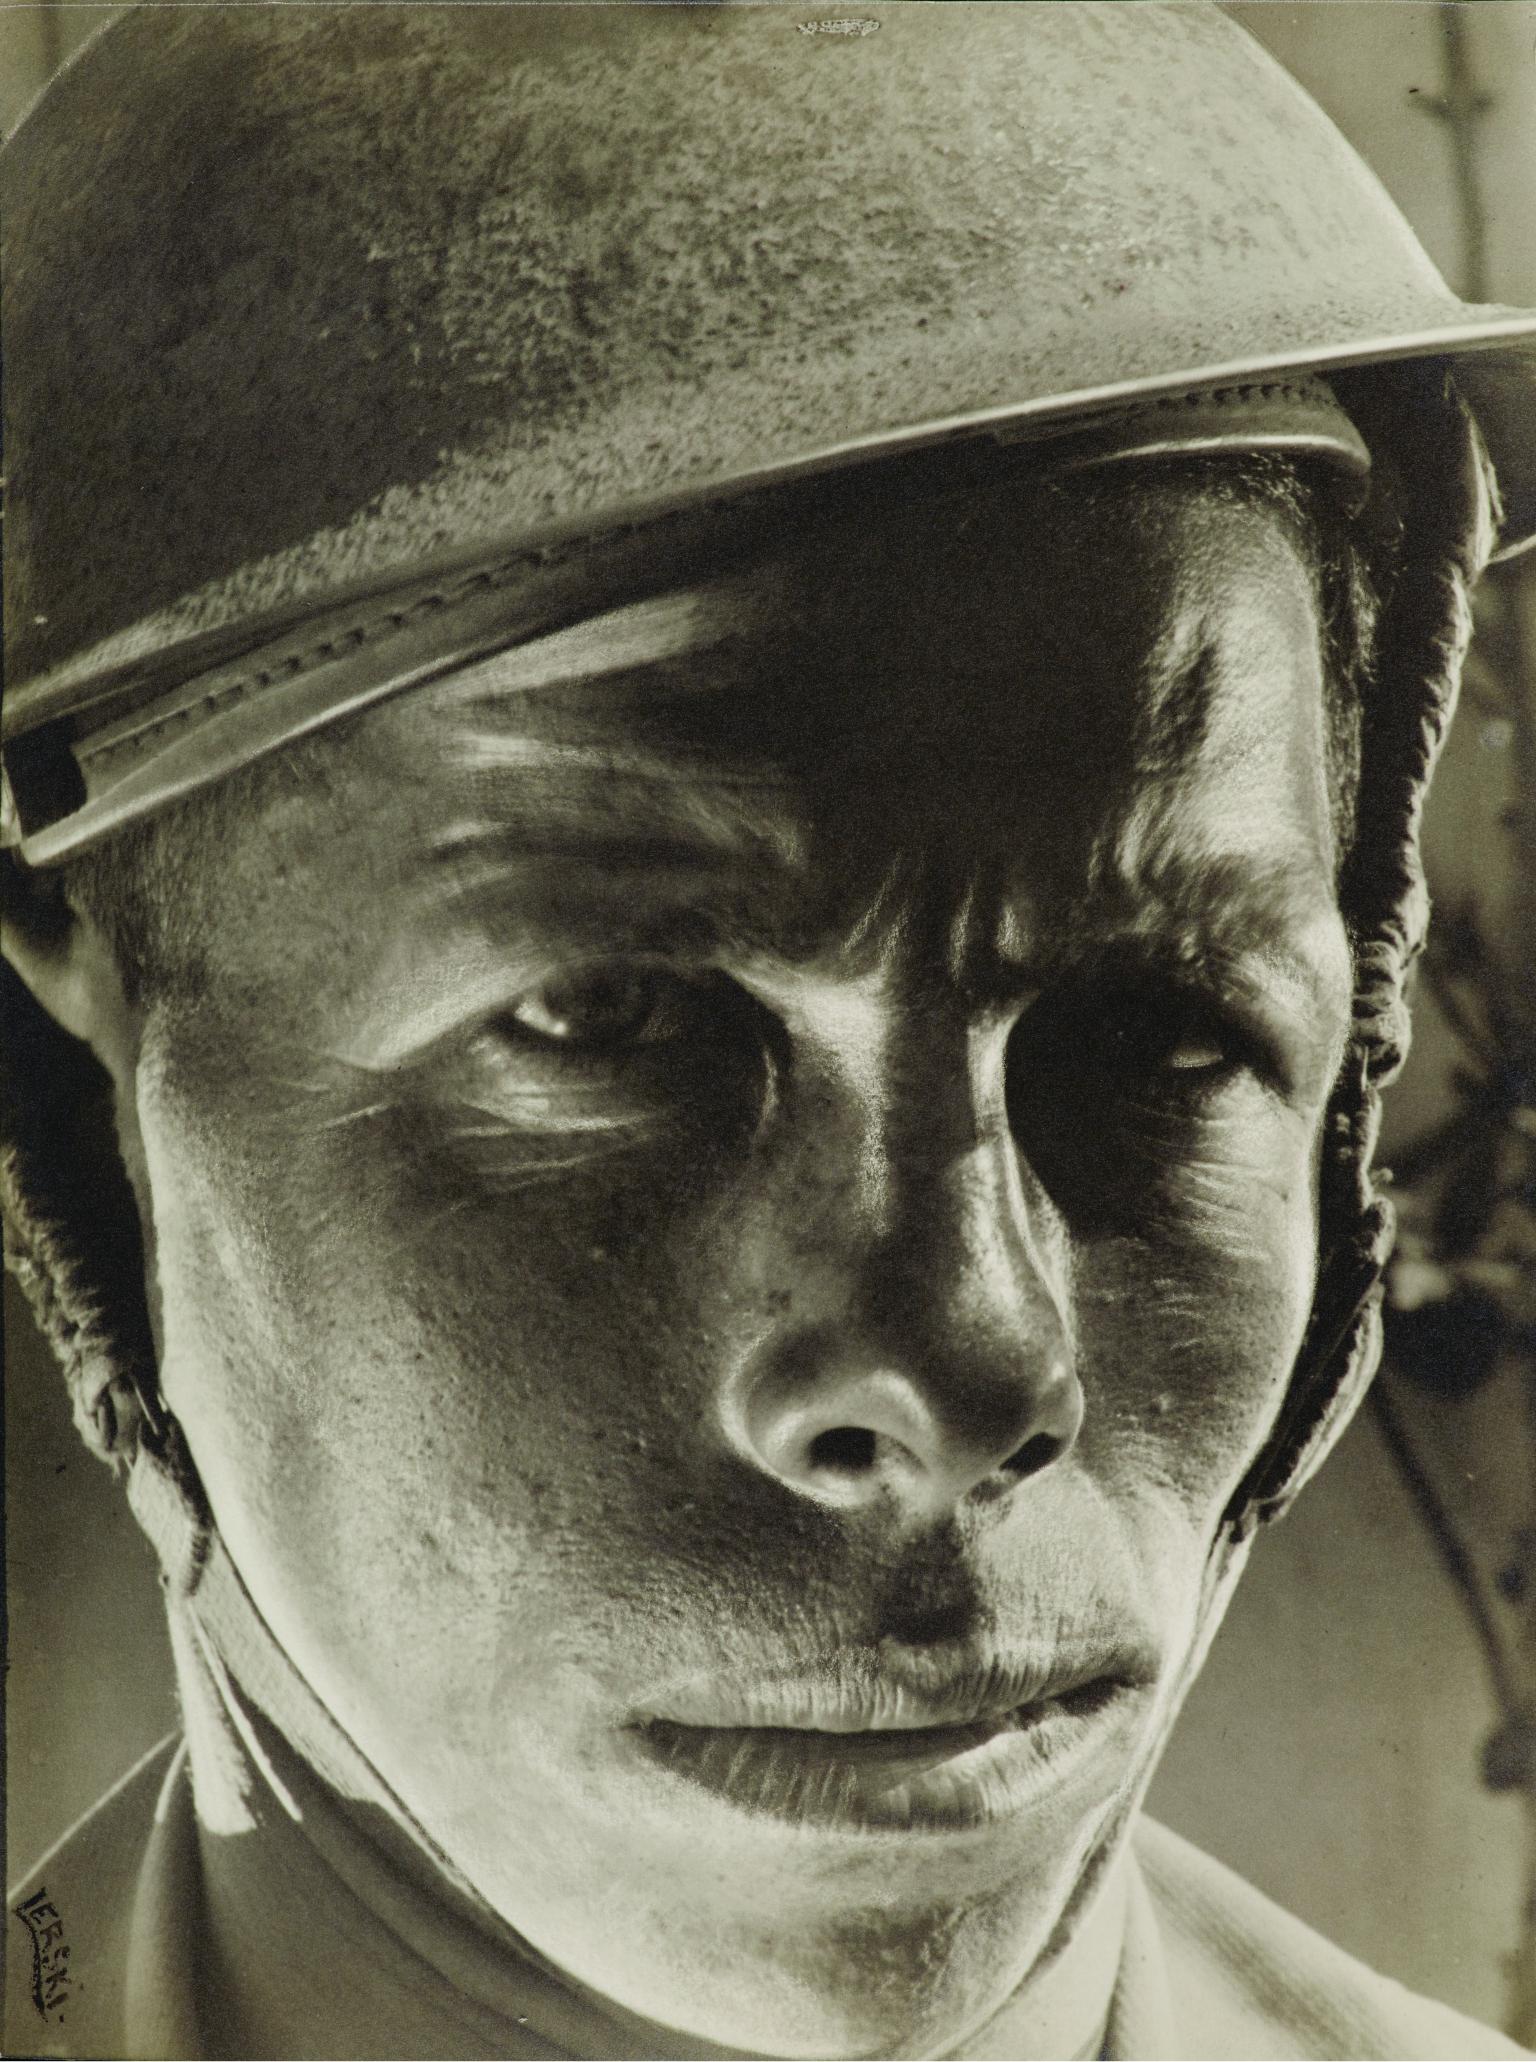 Portrait photograph of soldier wearing helmet and stern expression.